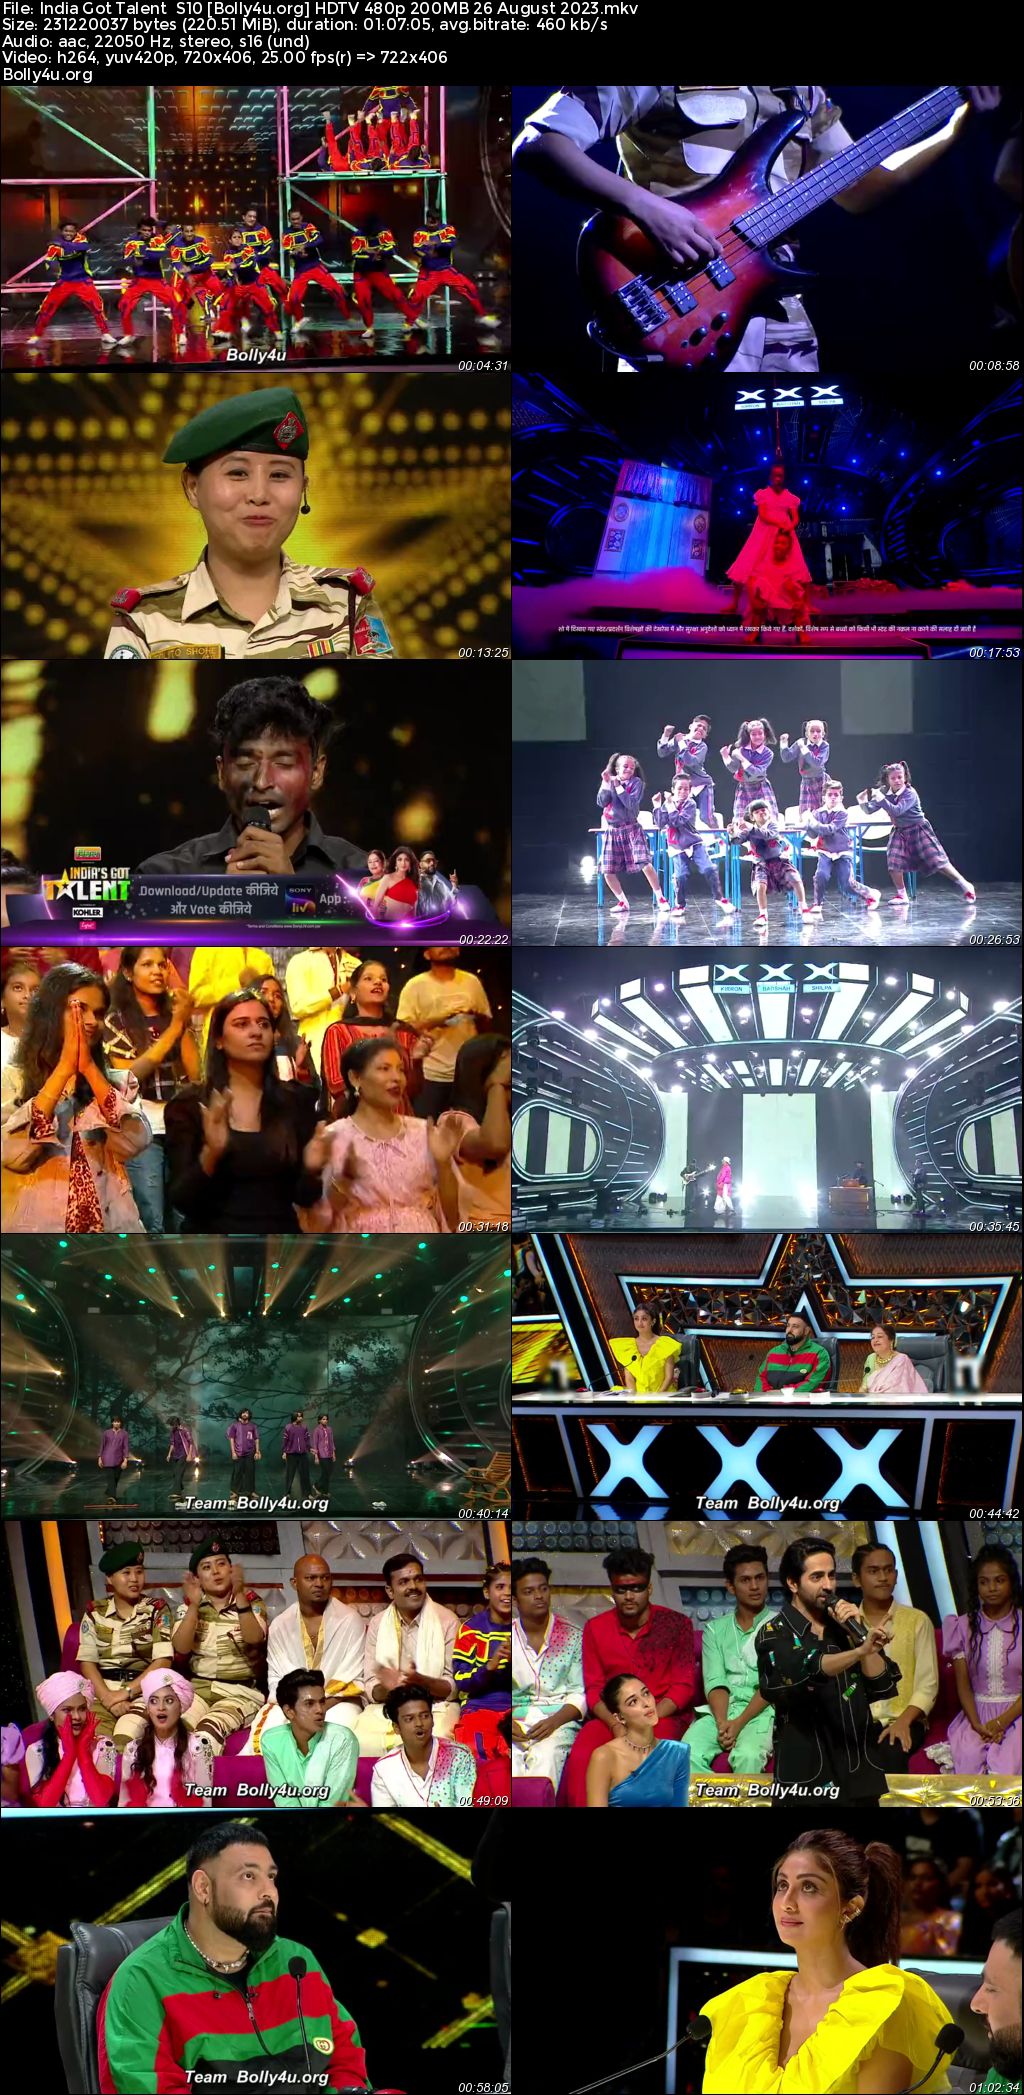 India Got Talent S10 HDTV 480p 200MB 26 August 2023 Download